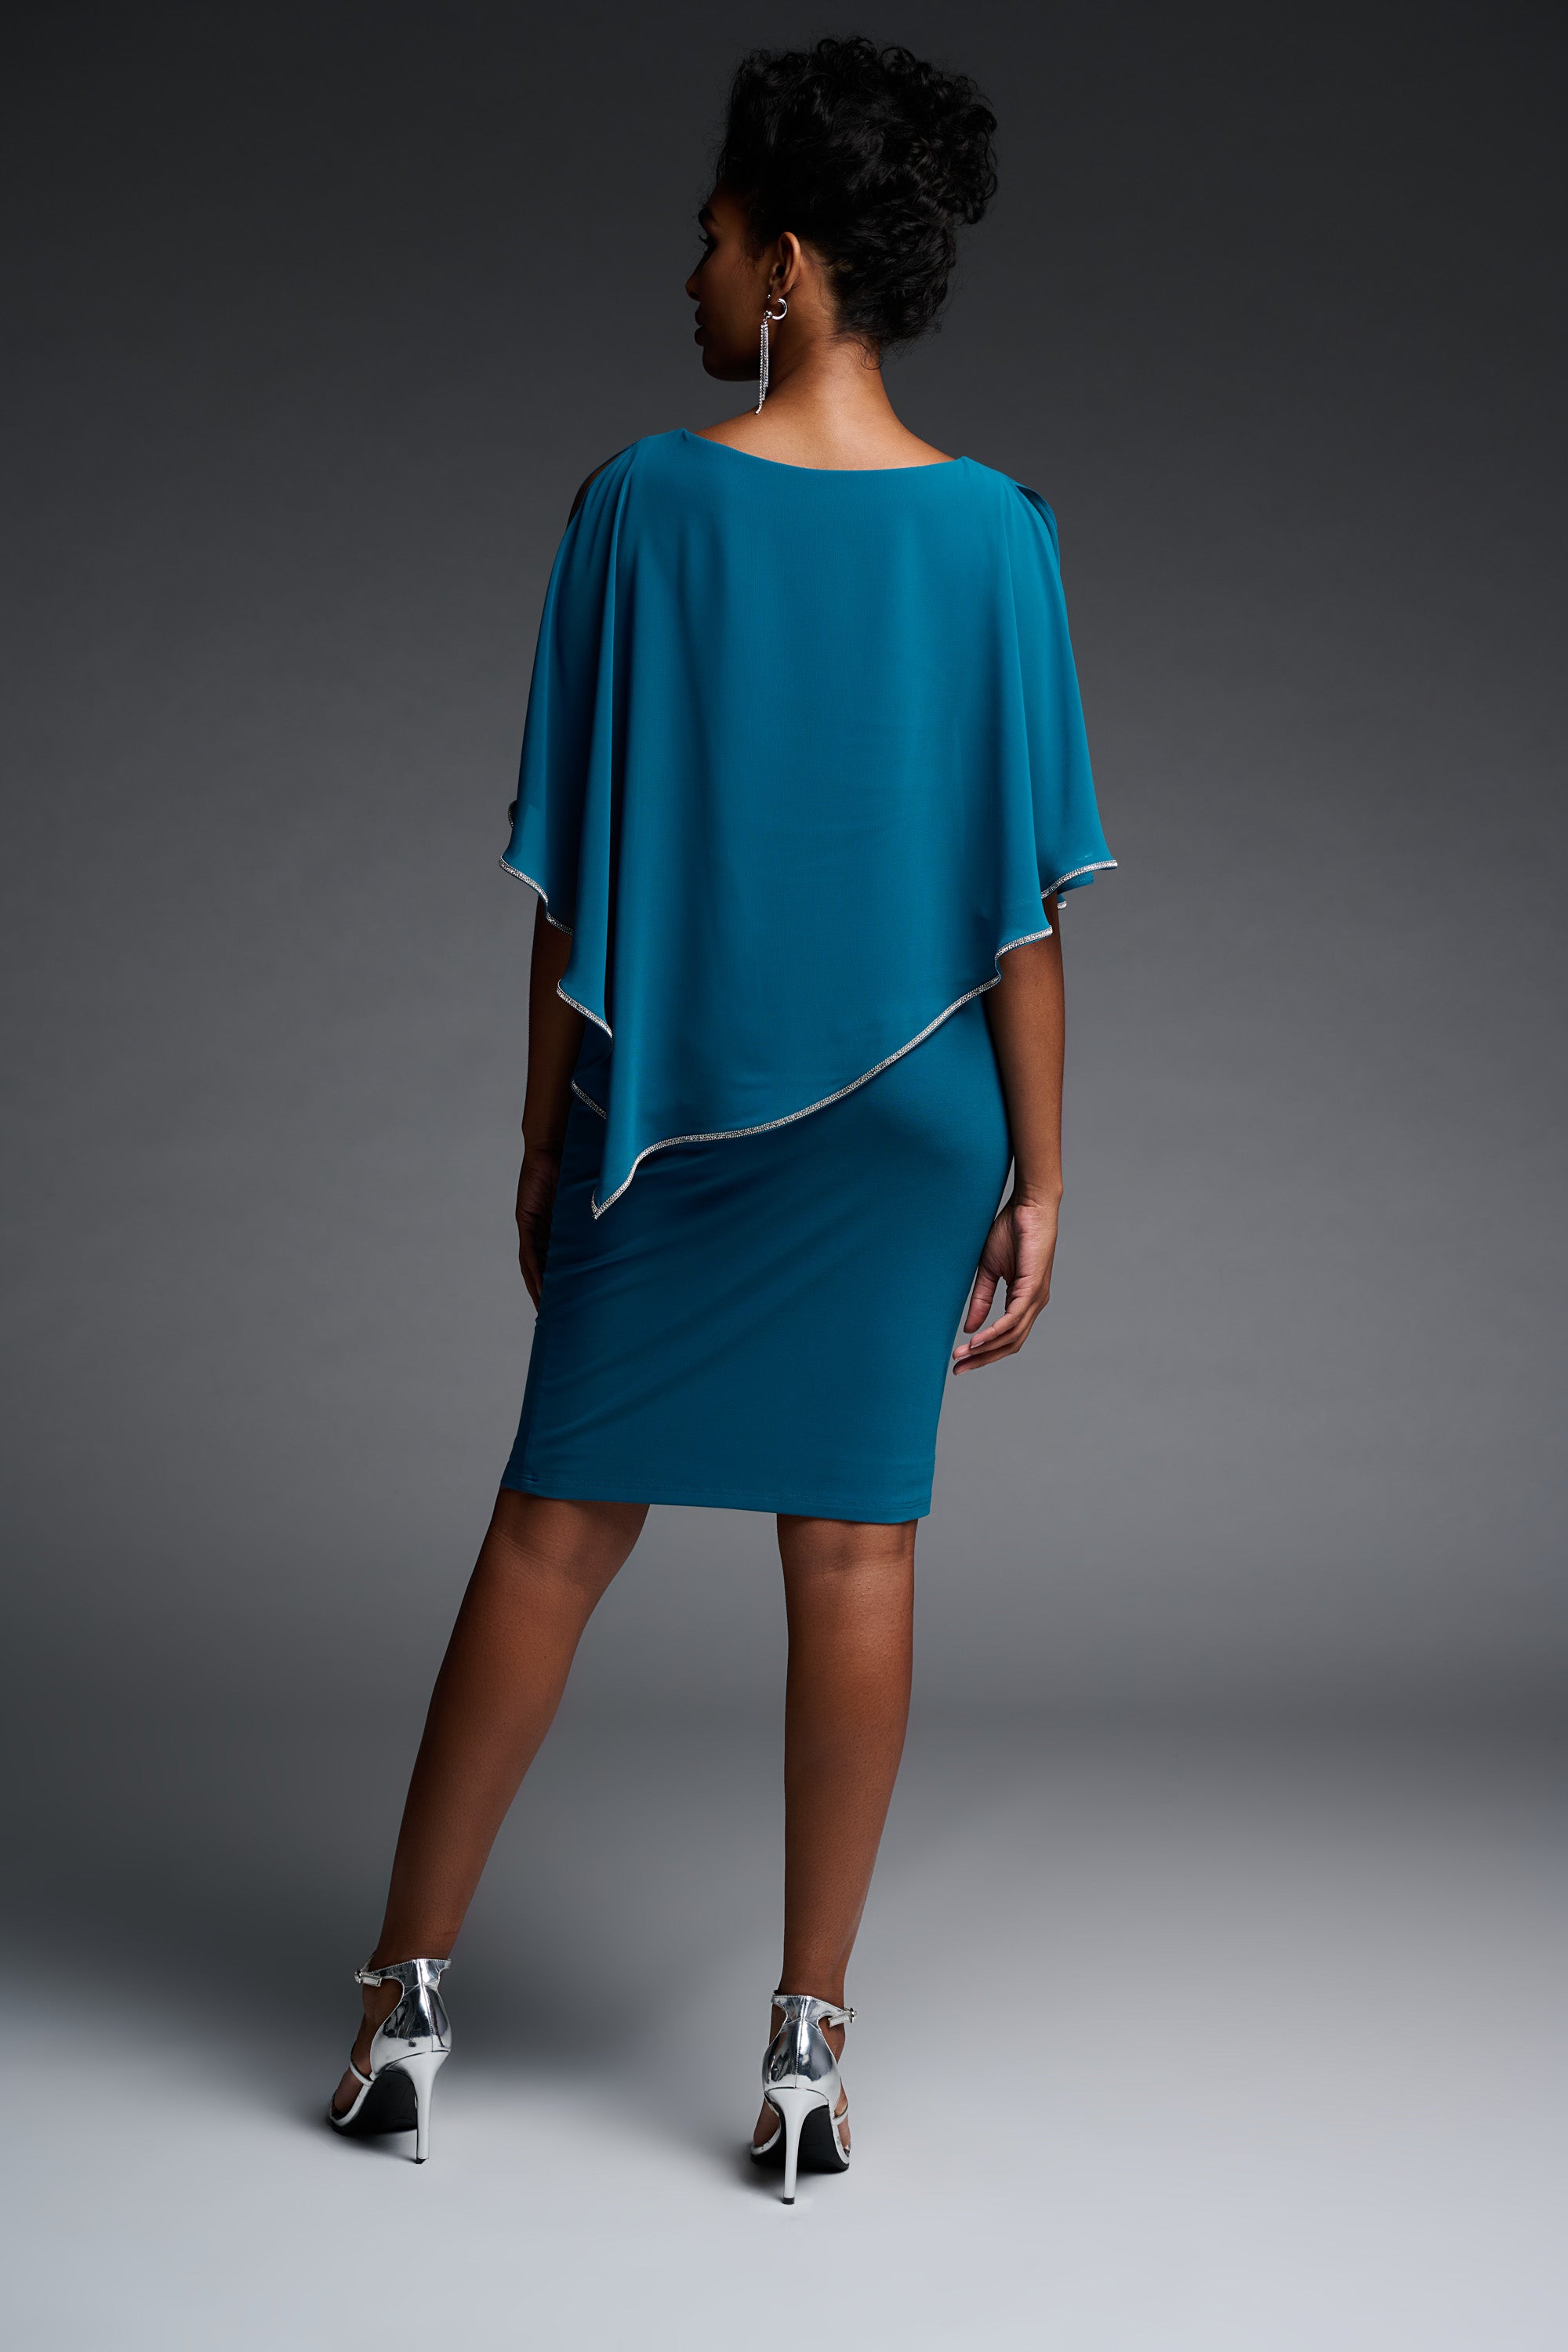 Layered Dress With Cape Overlay in Lagoon 223762 - After Hours Boutique